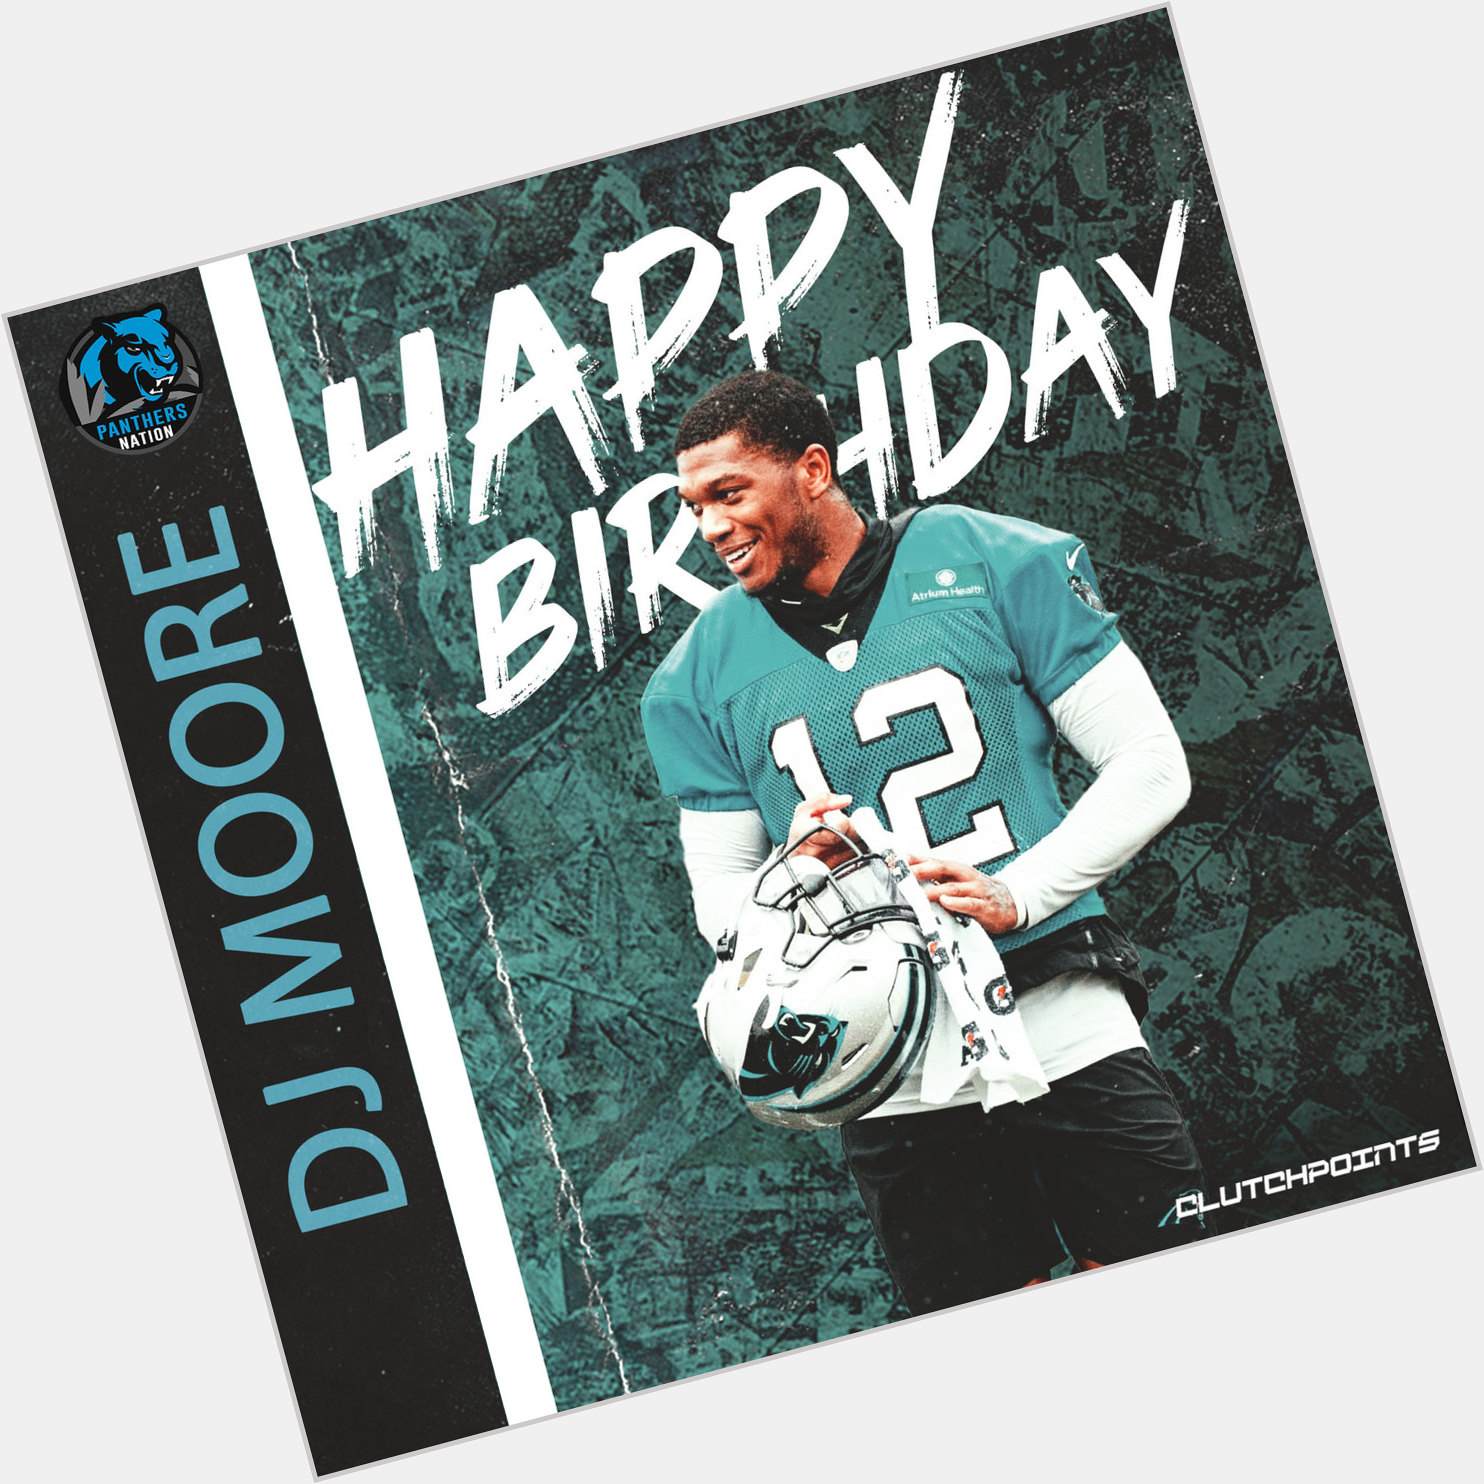 Let s all wish DJ Moore a happy 25th birthday! 